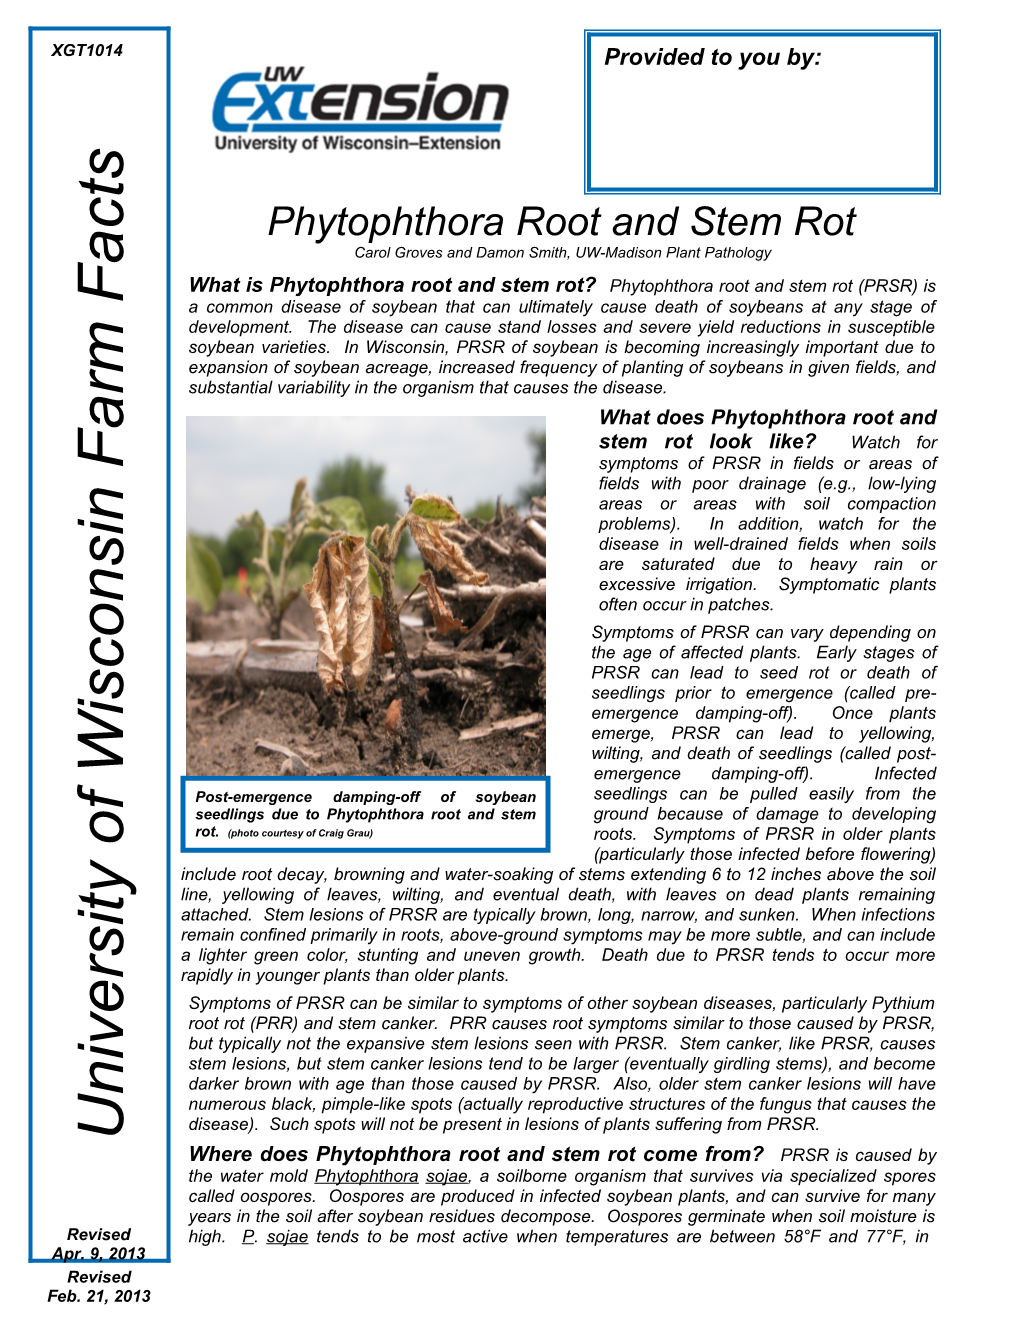 Phytophthora Root and Stem Rot